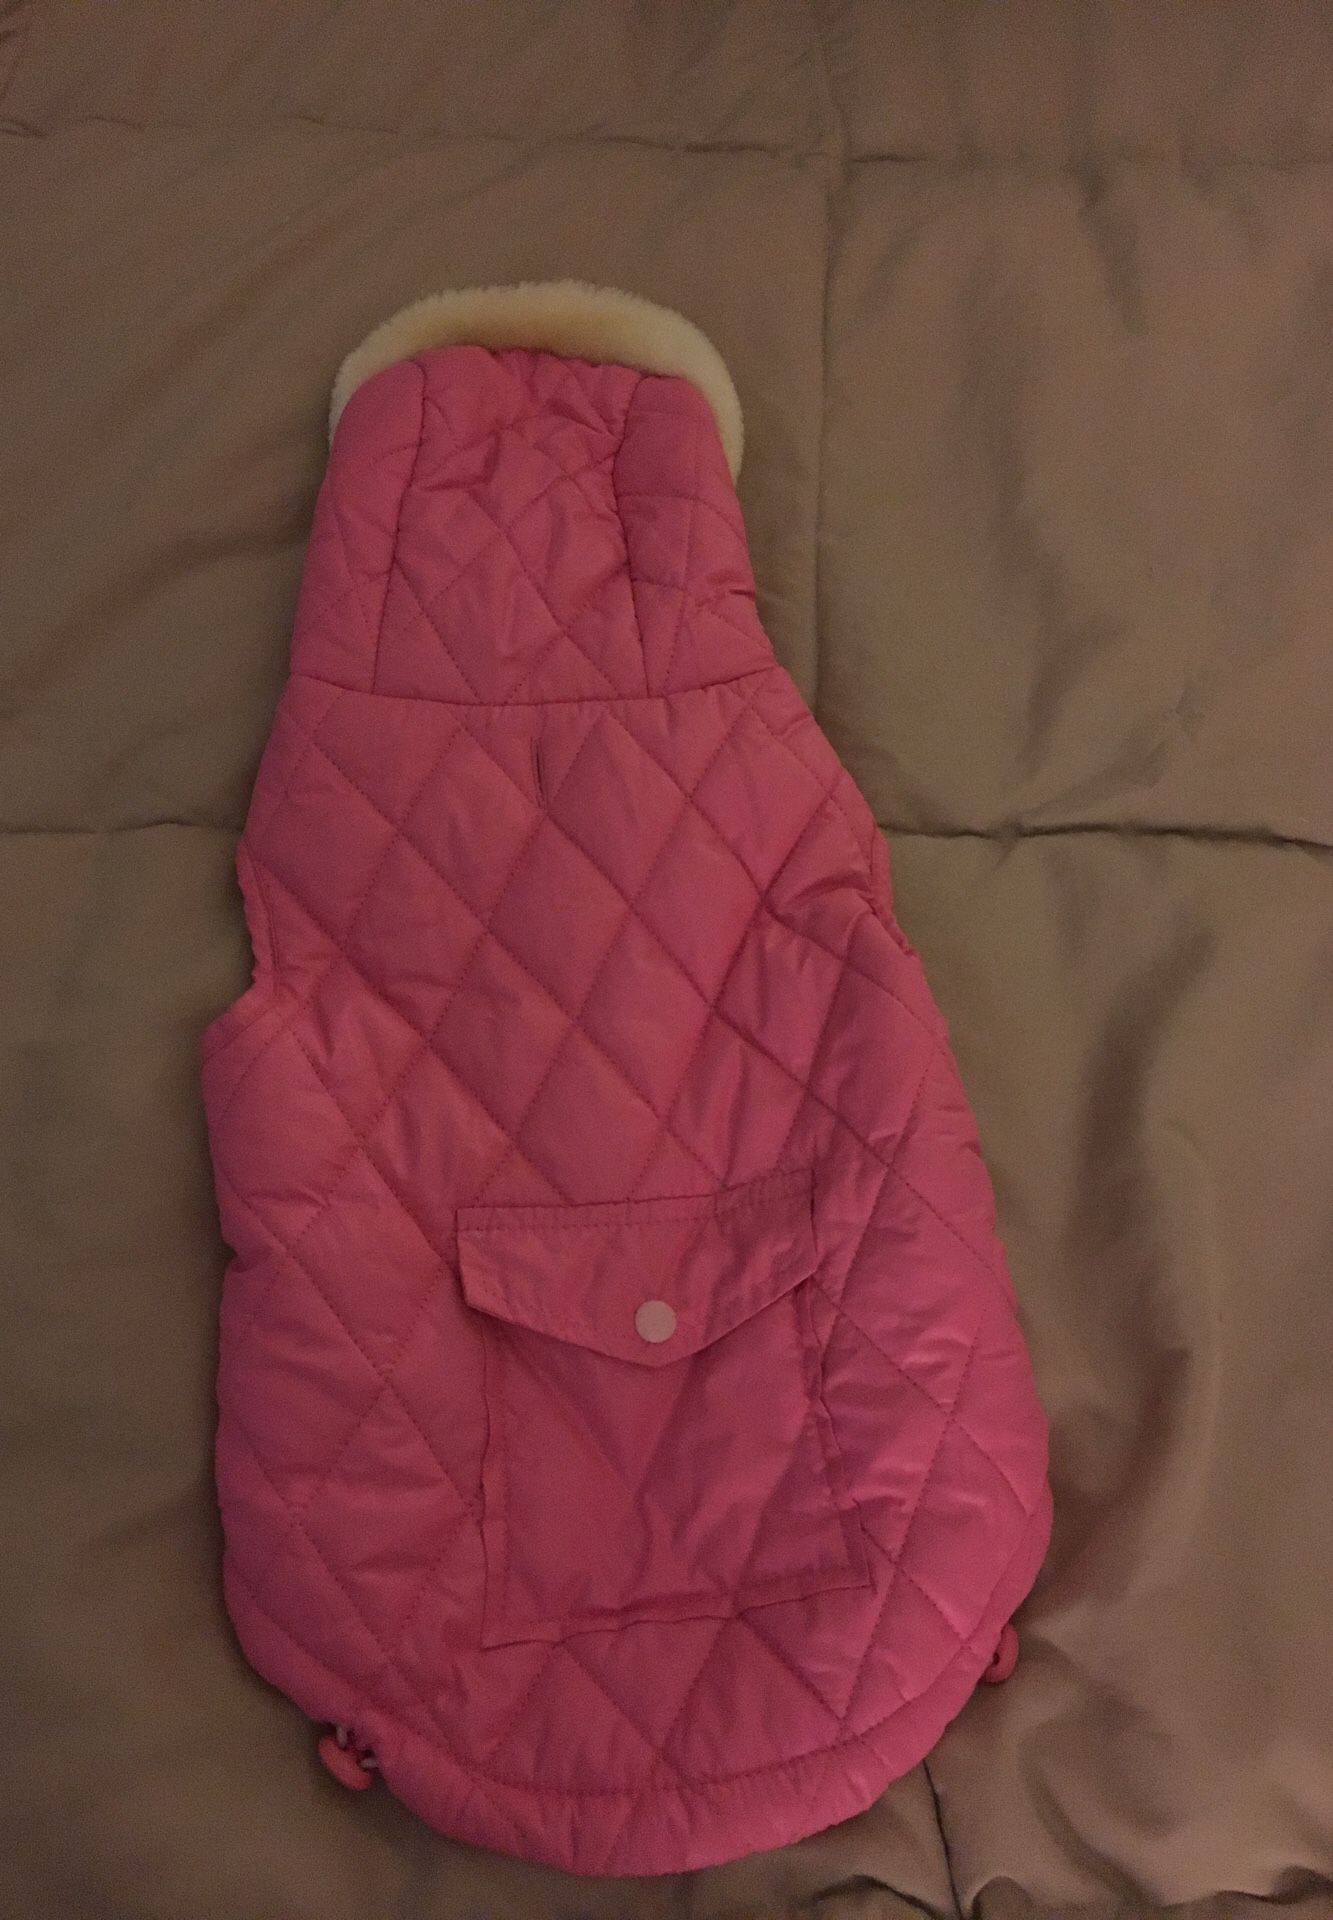 Dog coat . Waterproof. Name brand, pet central. Clean , no tears perfect for a medium size dog